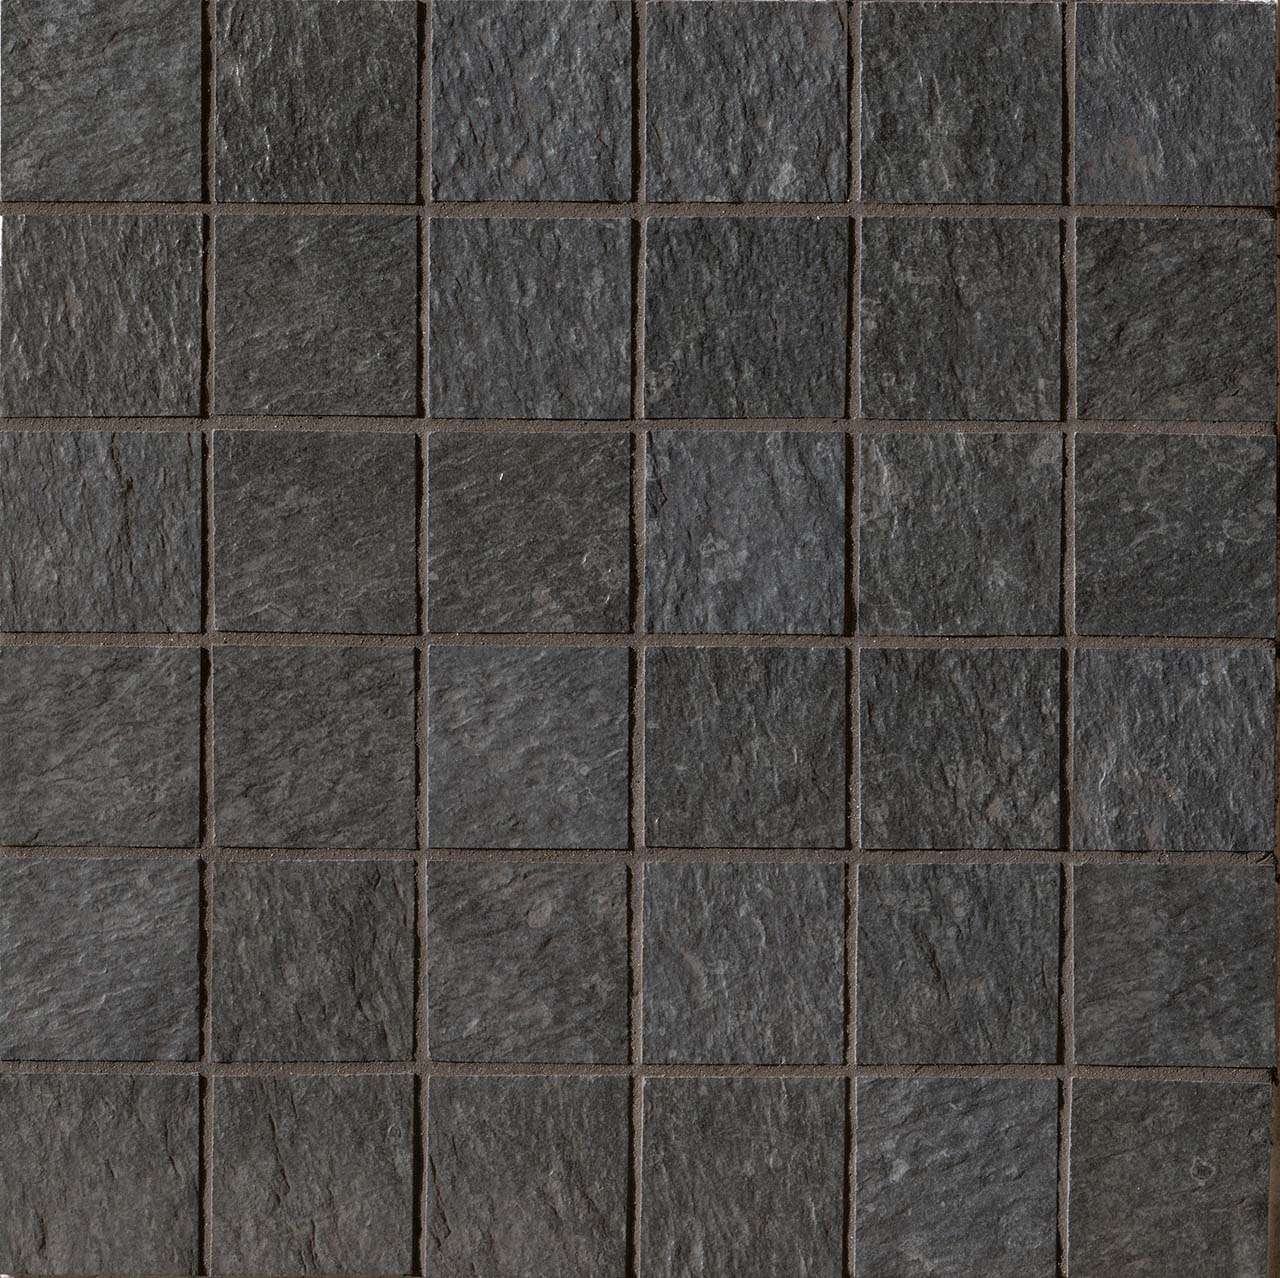 Fap Nord Night Gres Macromosaico Out 30x30